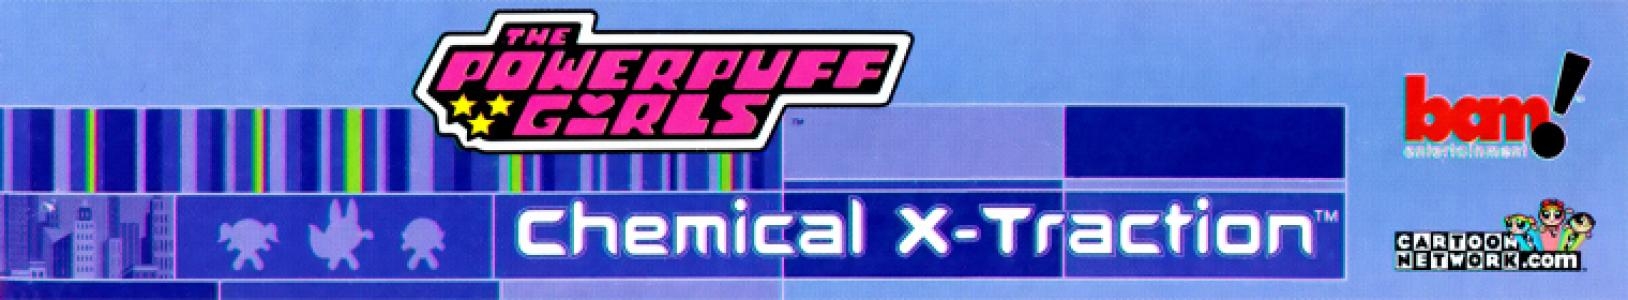 The Powerpuff Girls: Chemical X-traction banner